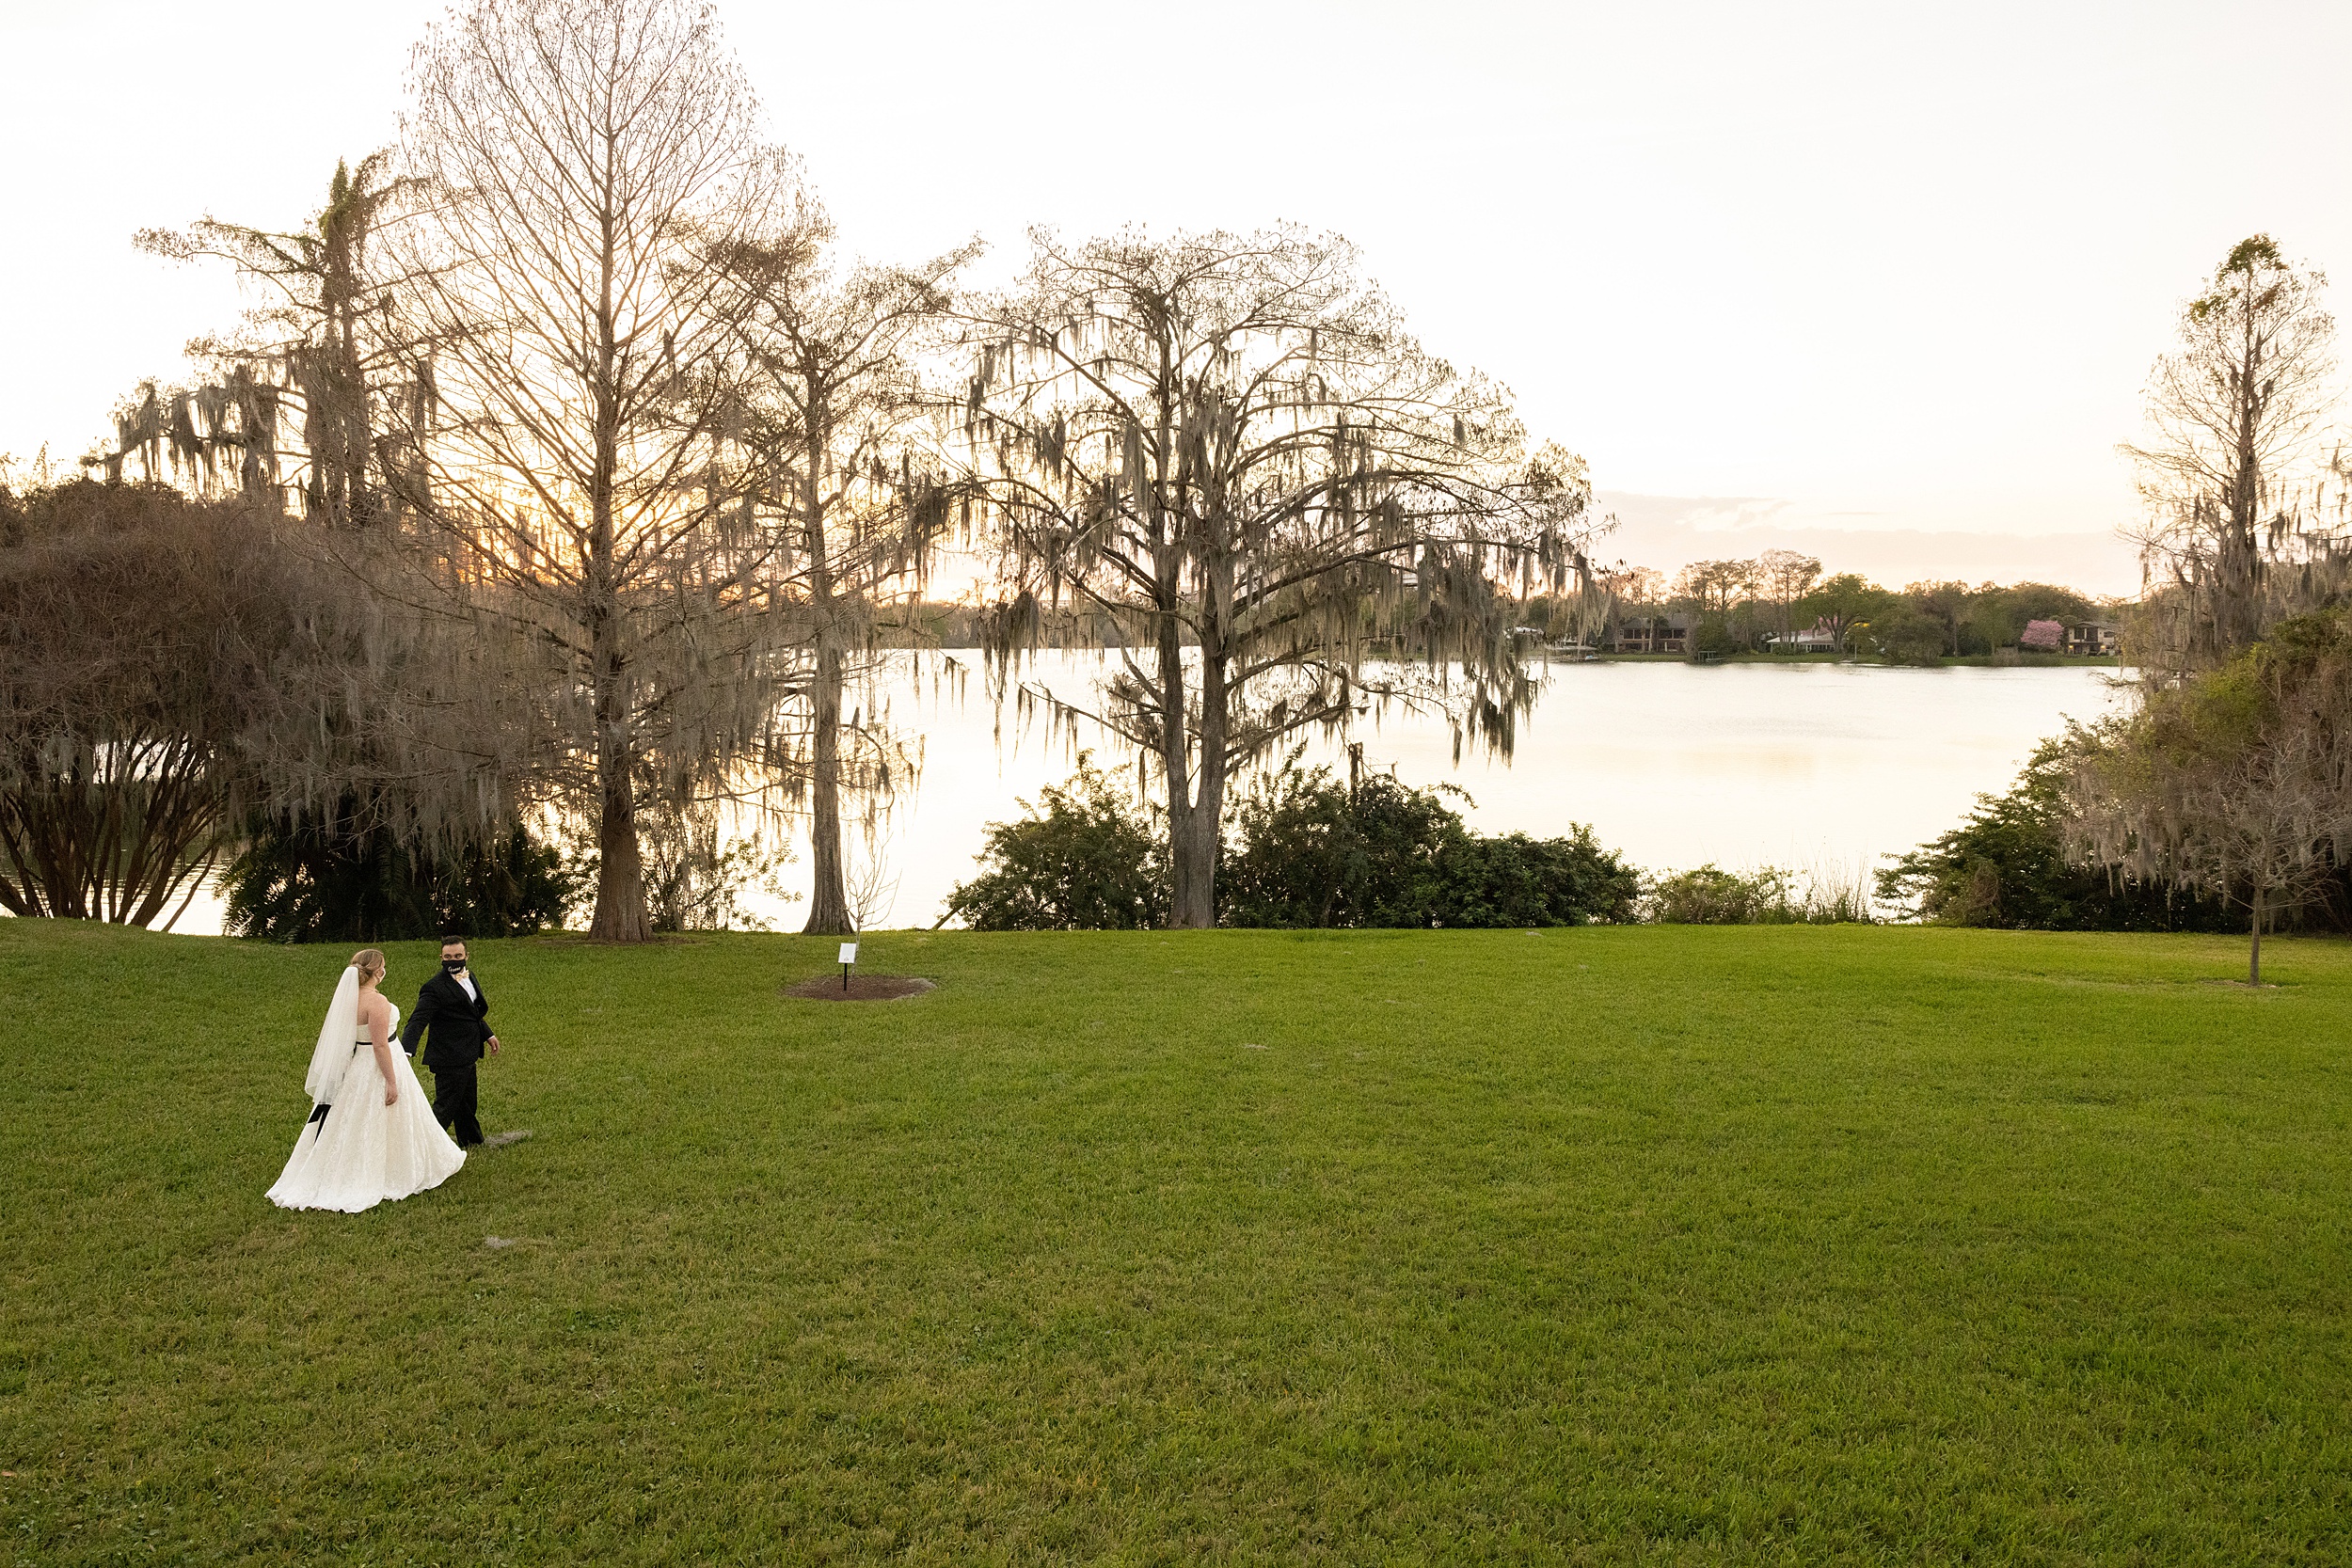 Newlyweds walk hand in hand through a lawn on a lake